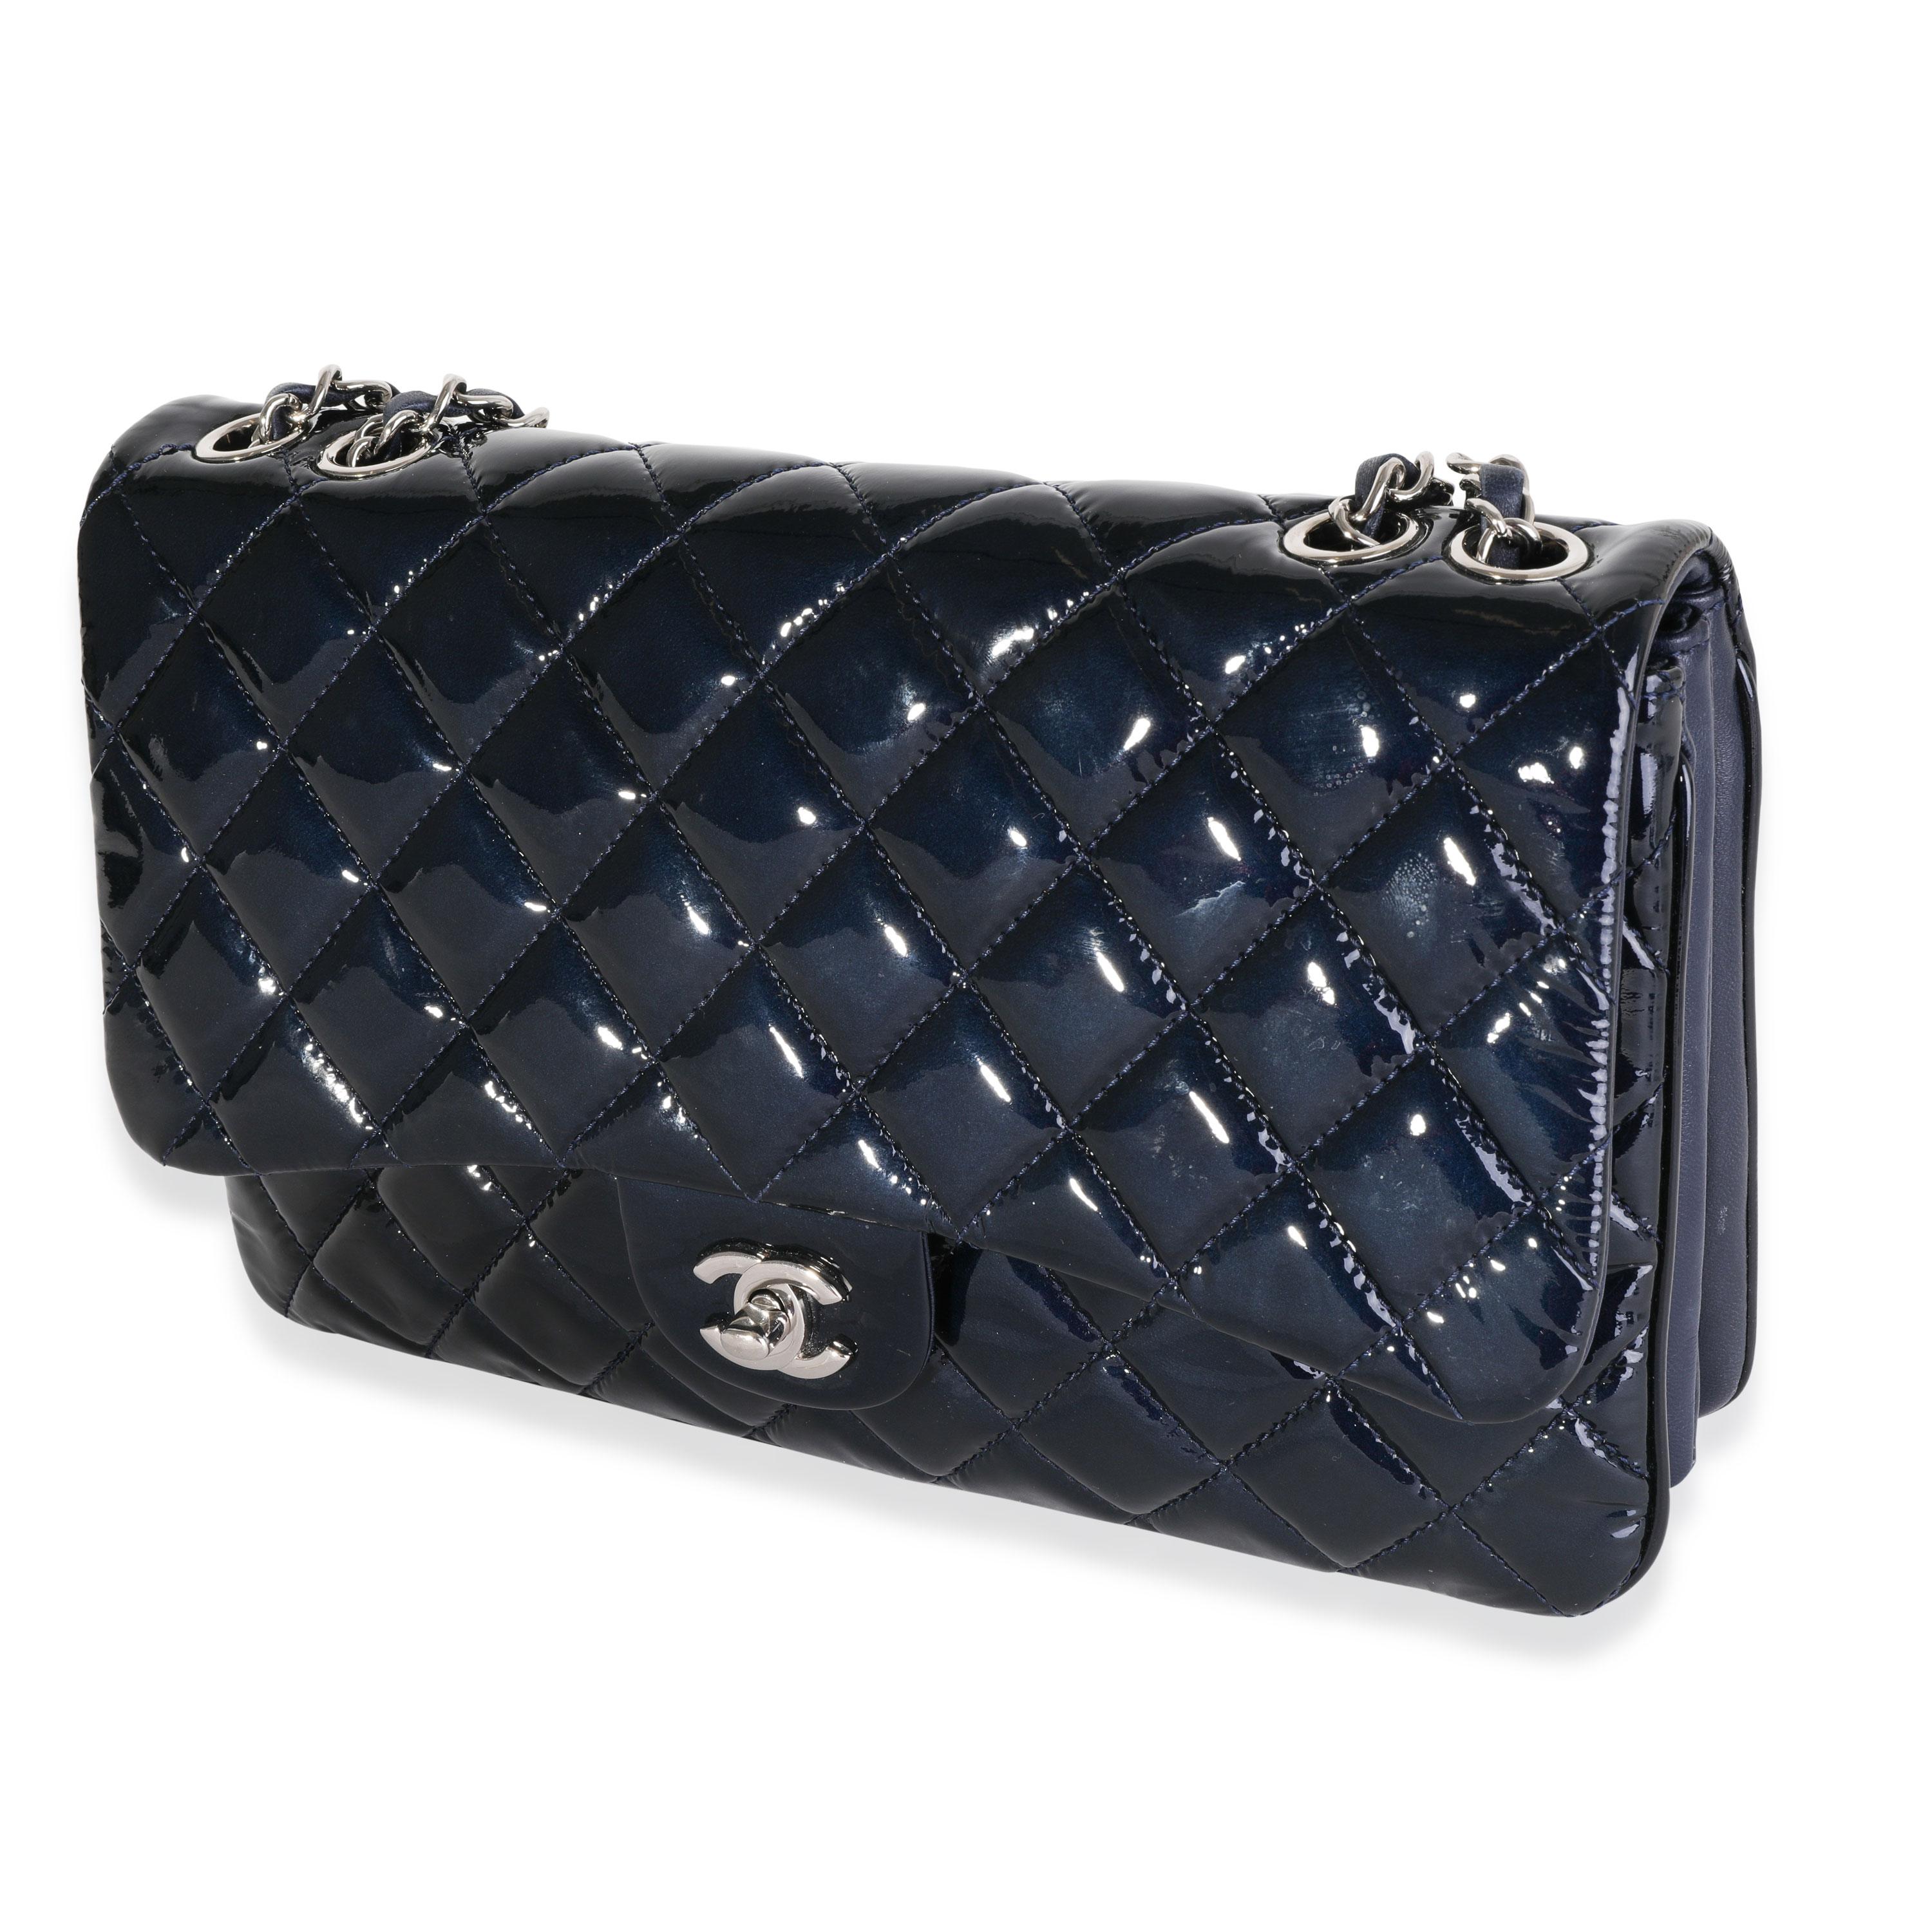 Black Chanel Navy Quilted Patent Leather Accordion Flap Bag